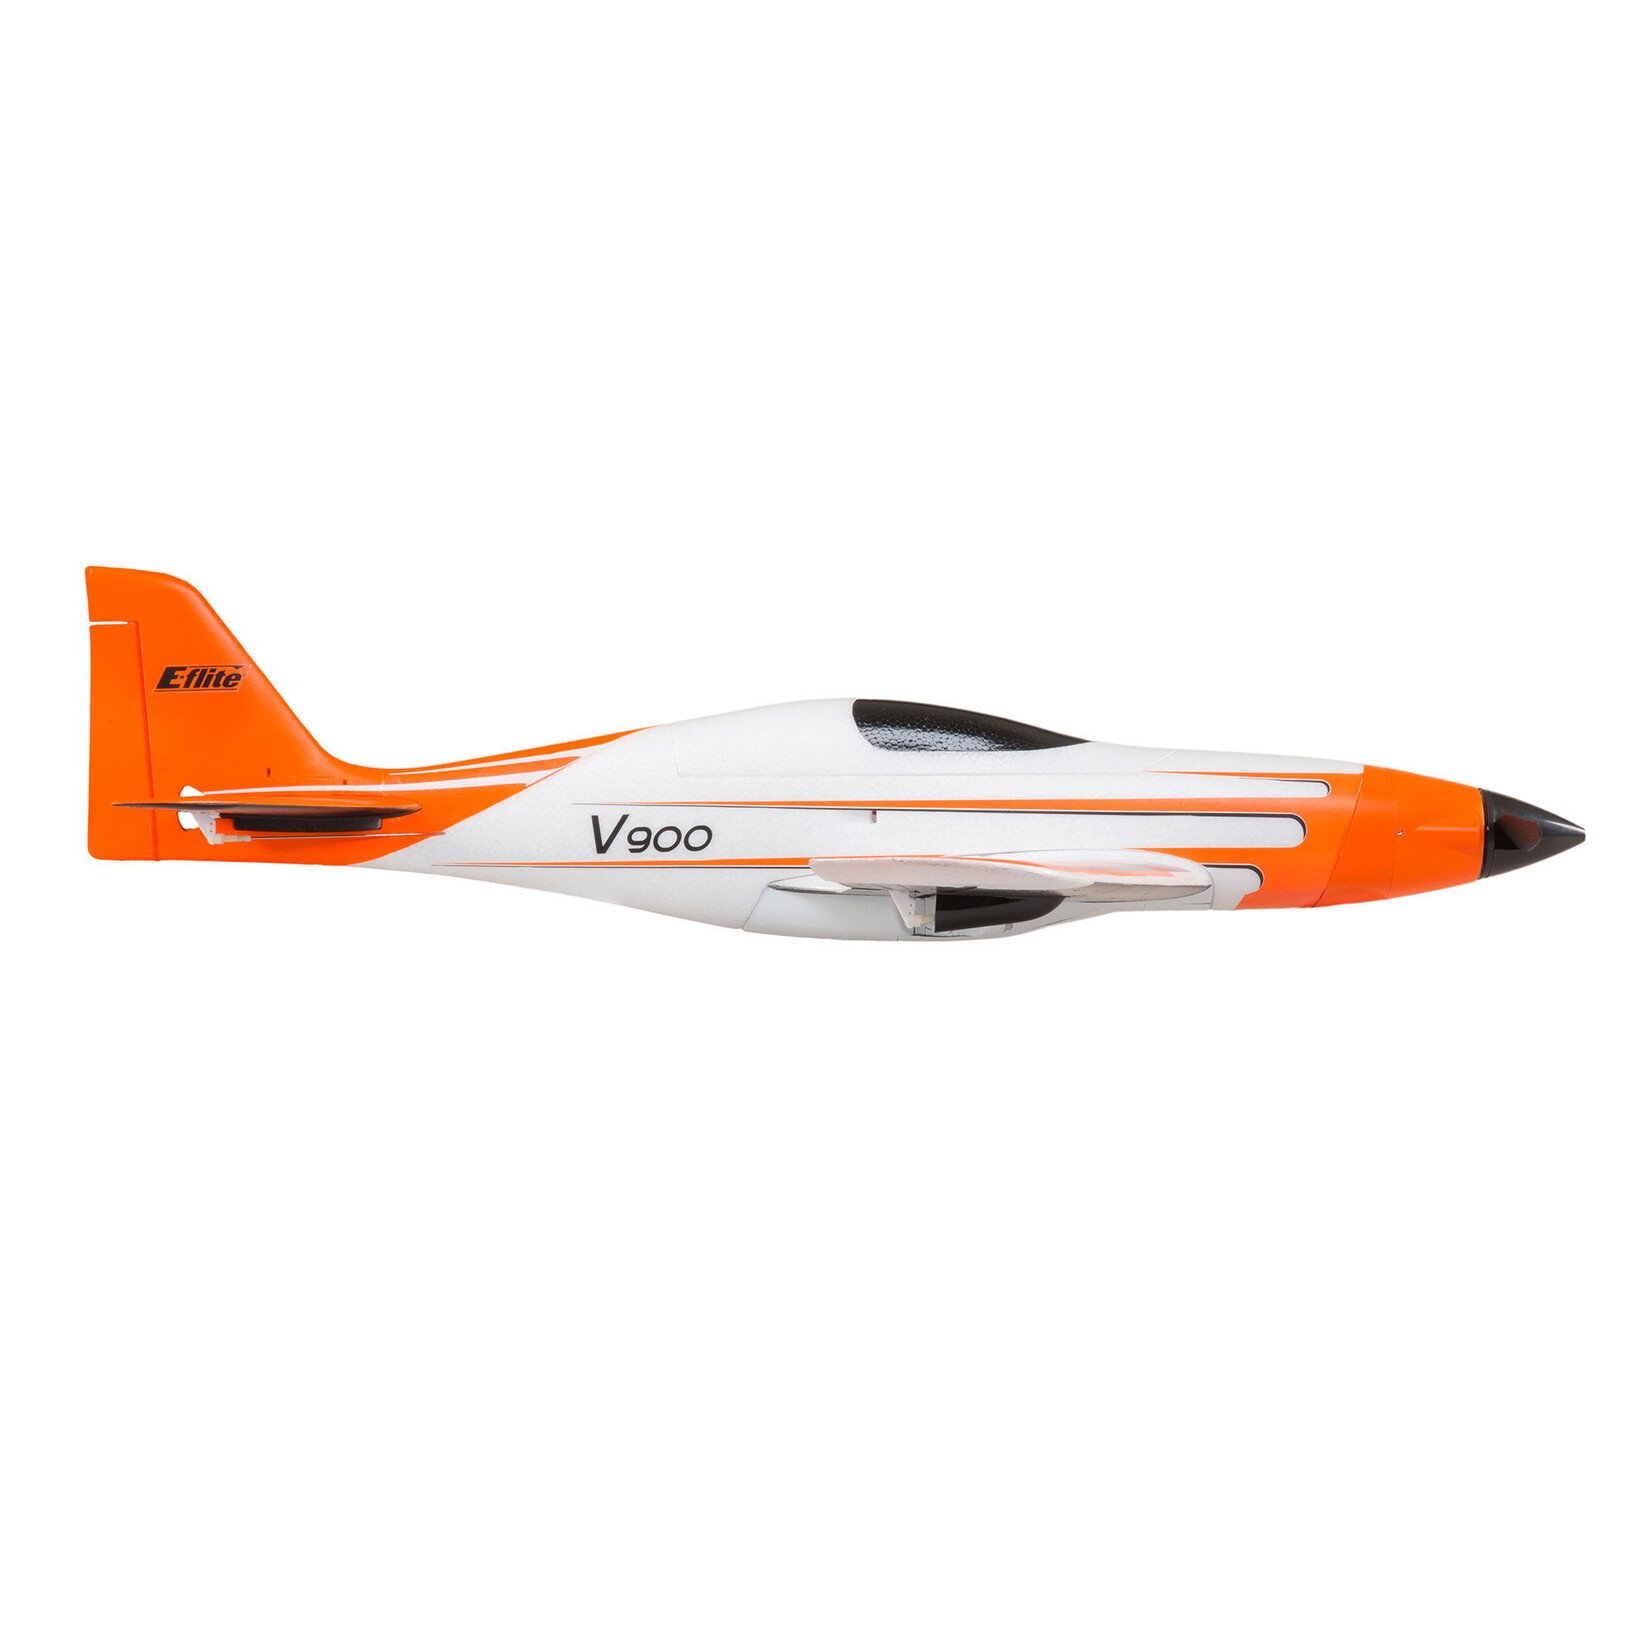 E-Flite V900 BNF Basic with AS3X and SAFE Select, 900mm